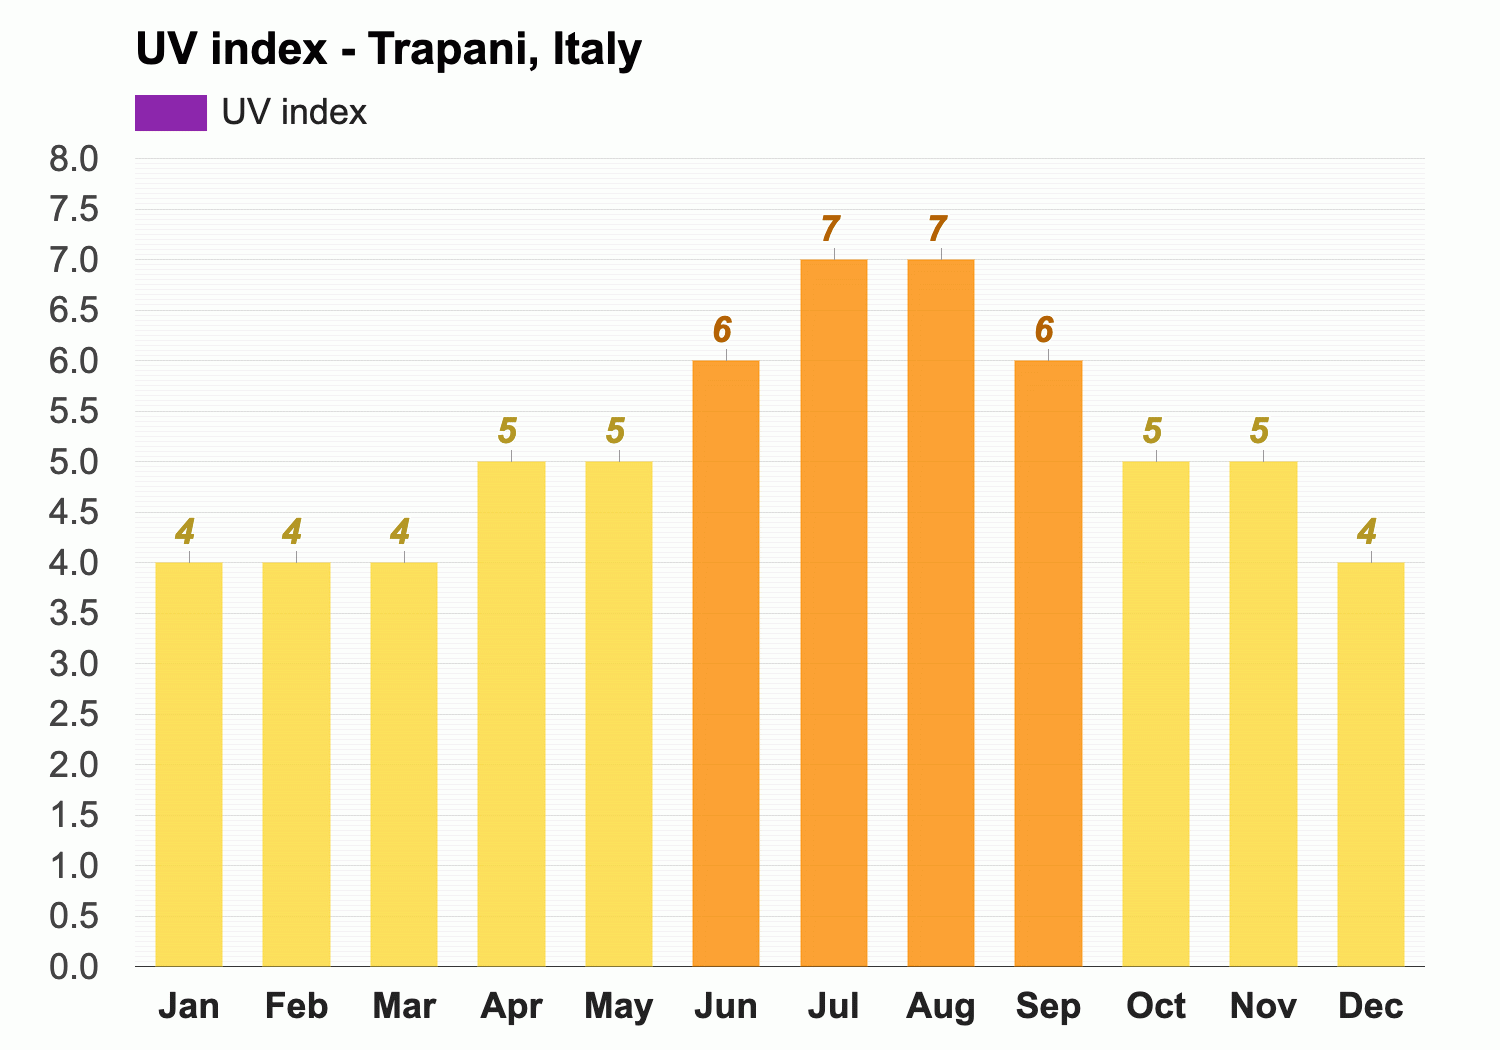 Yearly & Monthly weather - Trapani, Italy